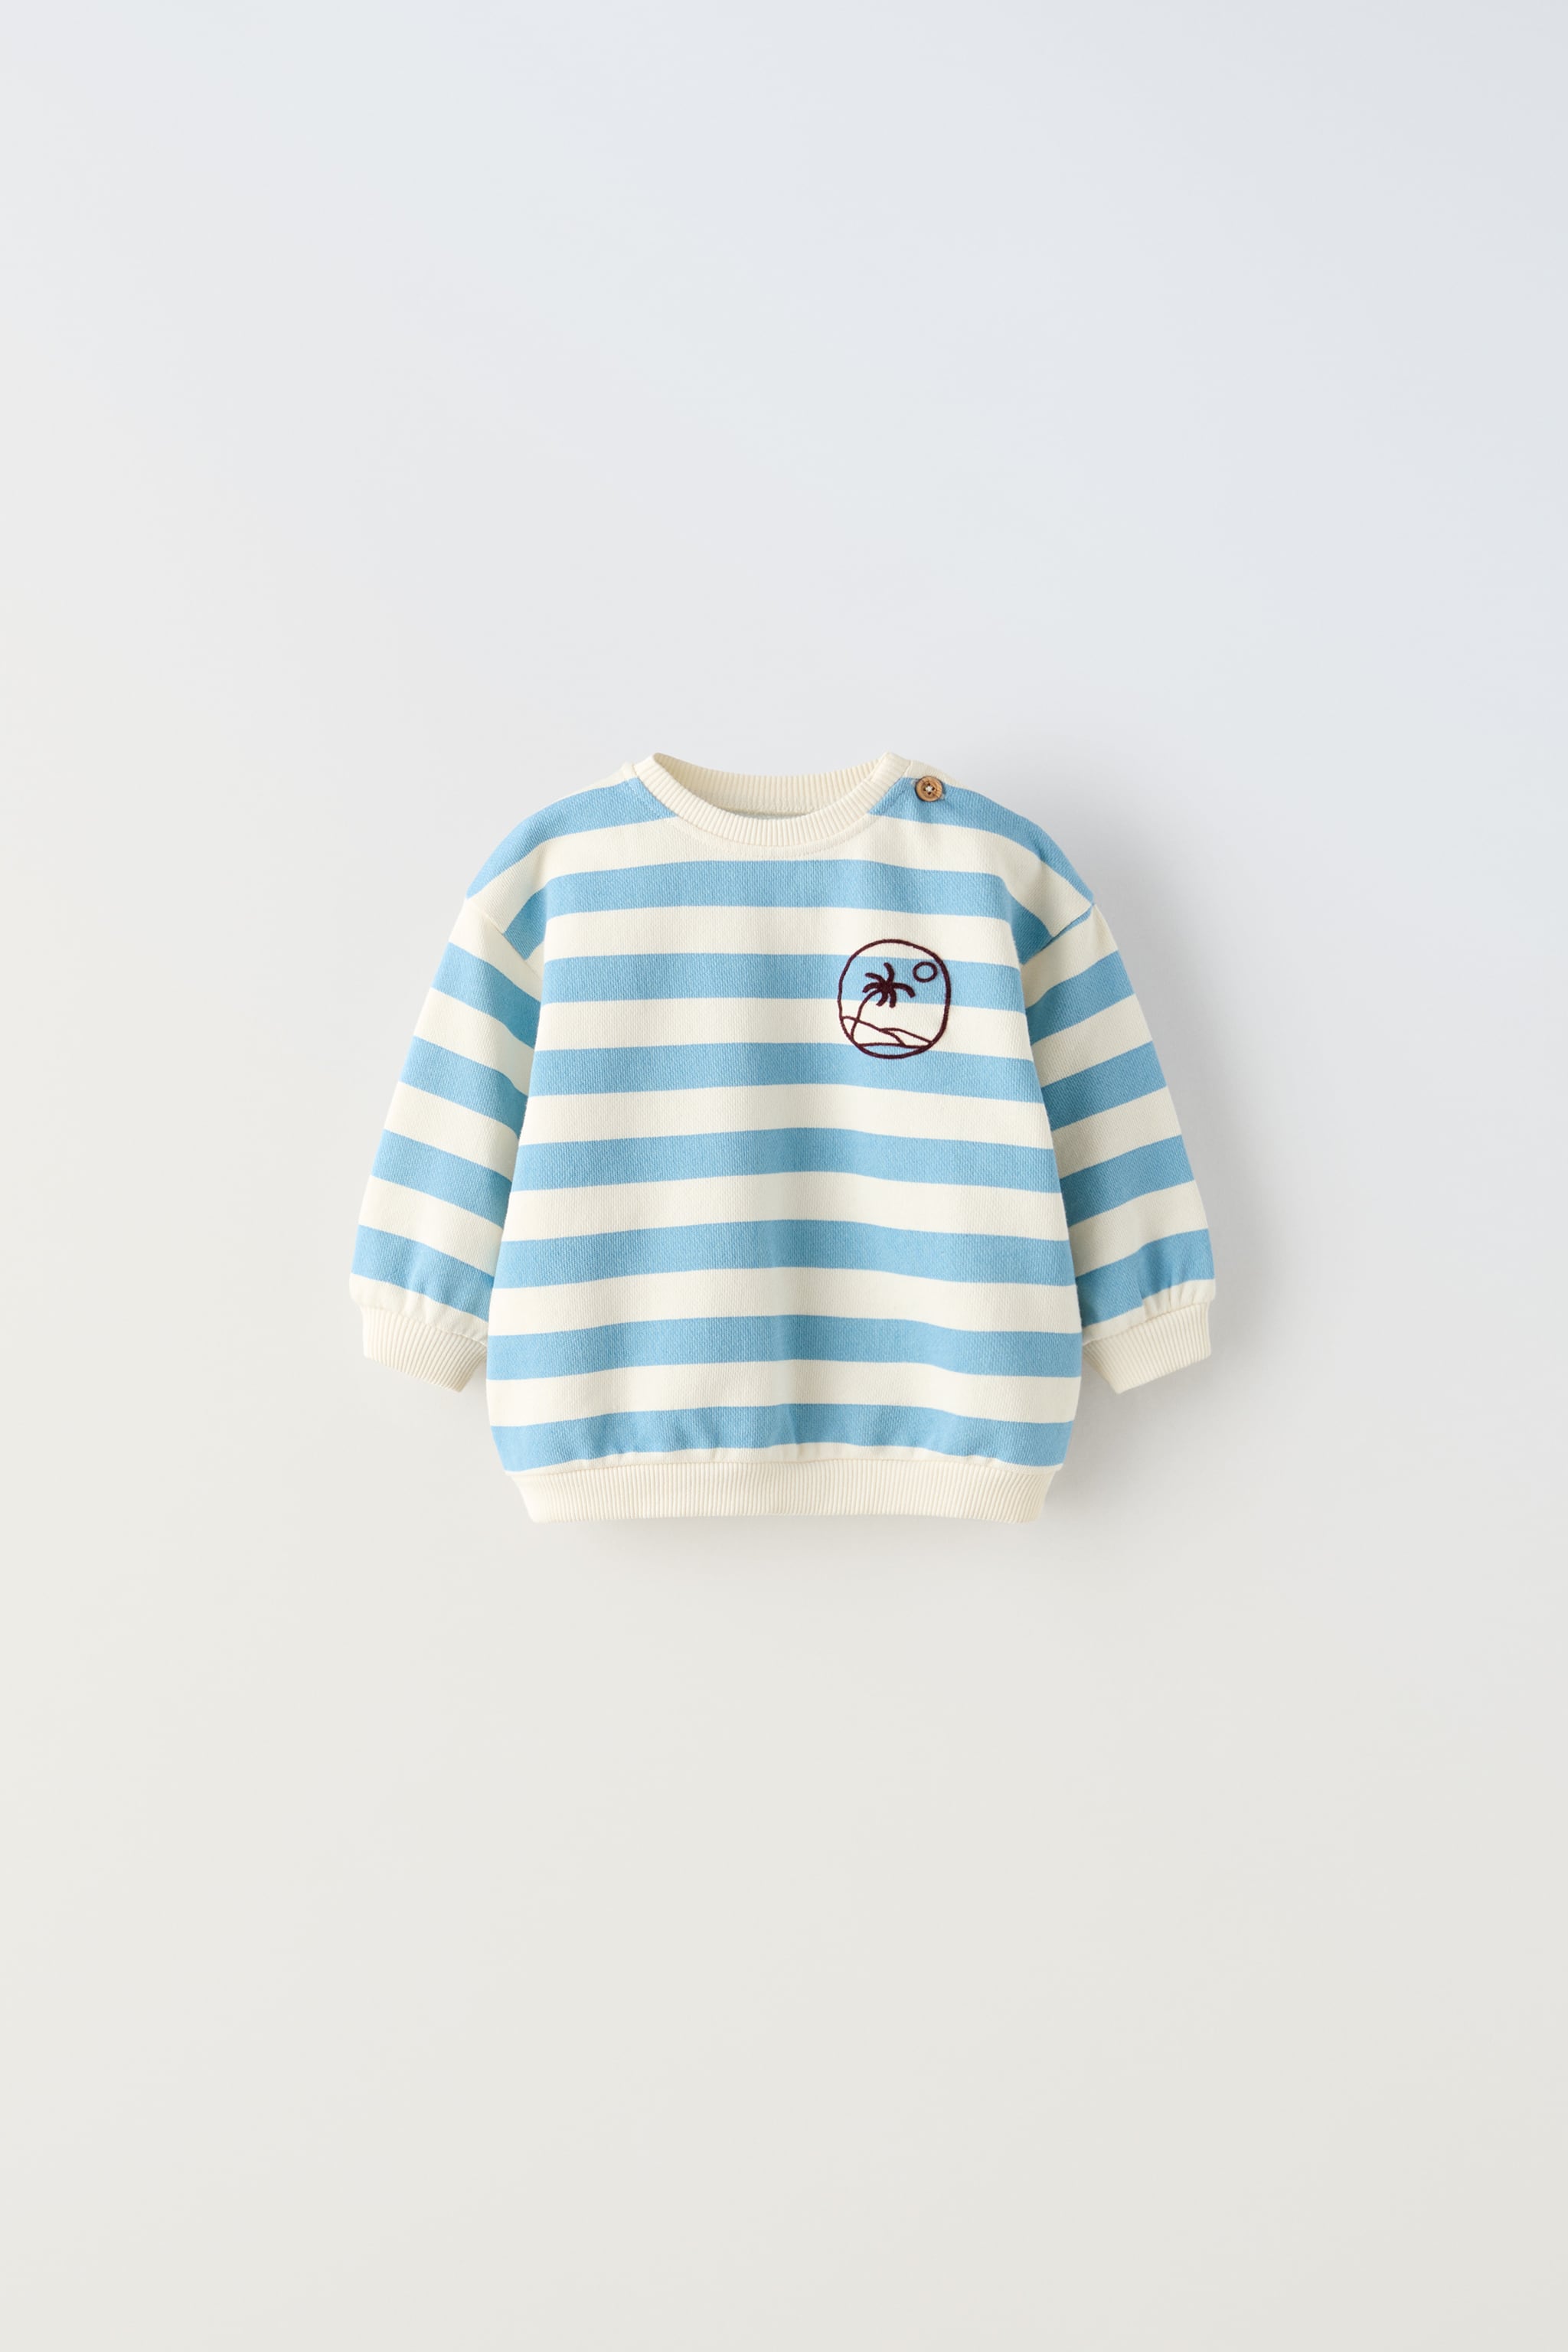 STRIPED SWEATSHIRT WITH FLOCKED EMBROIDERY